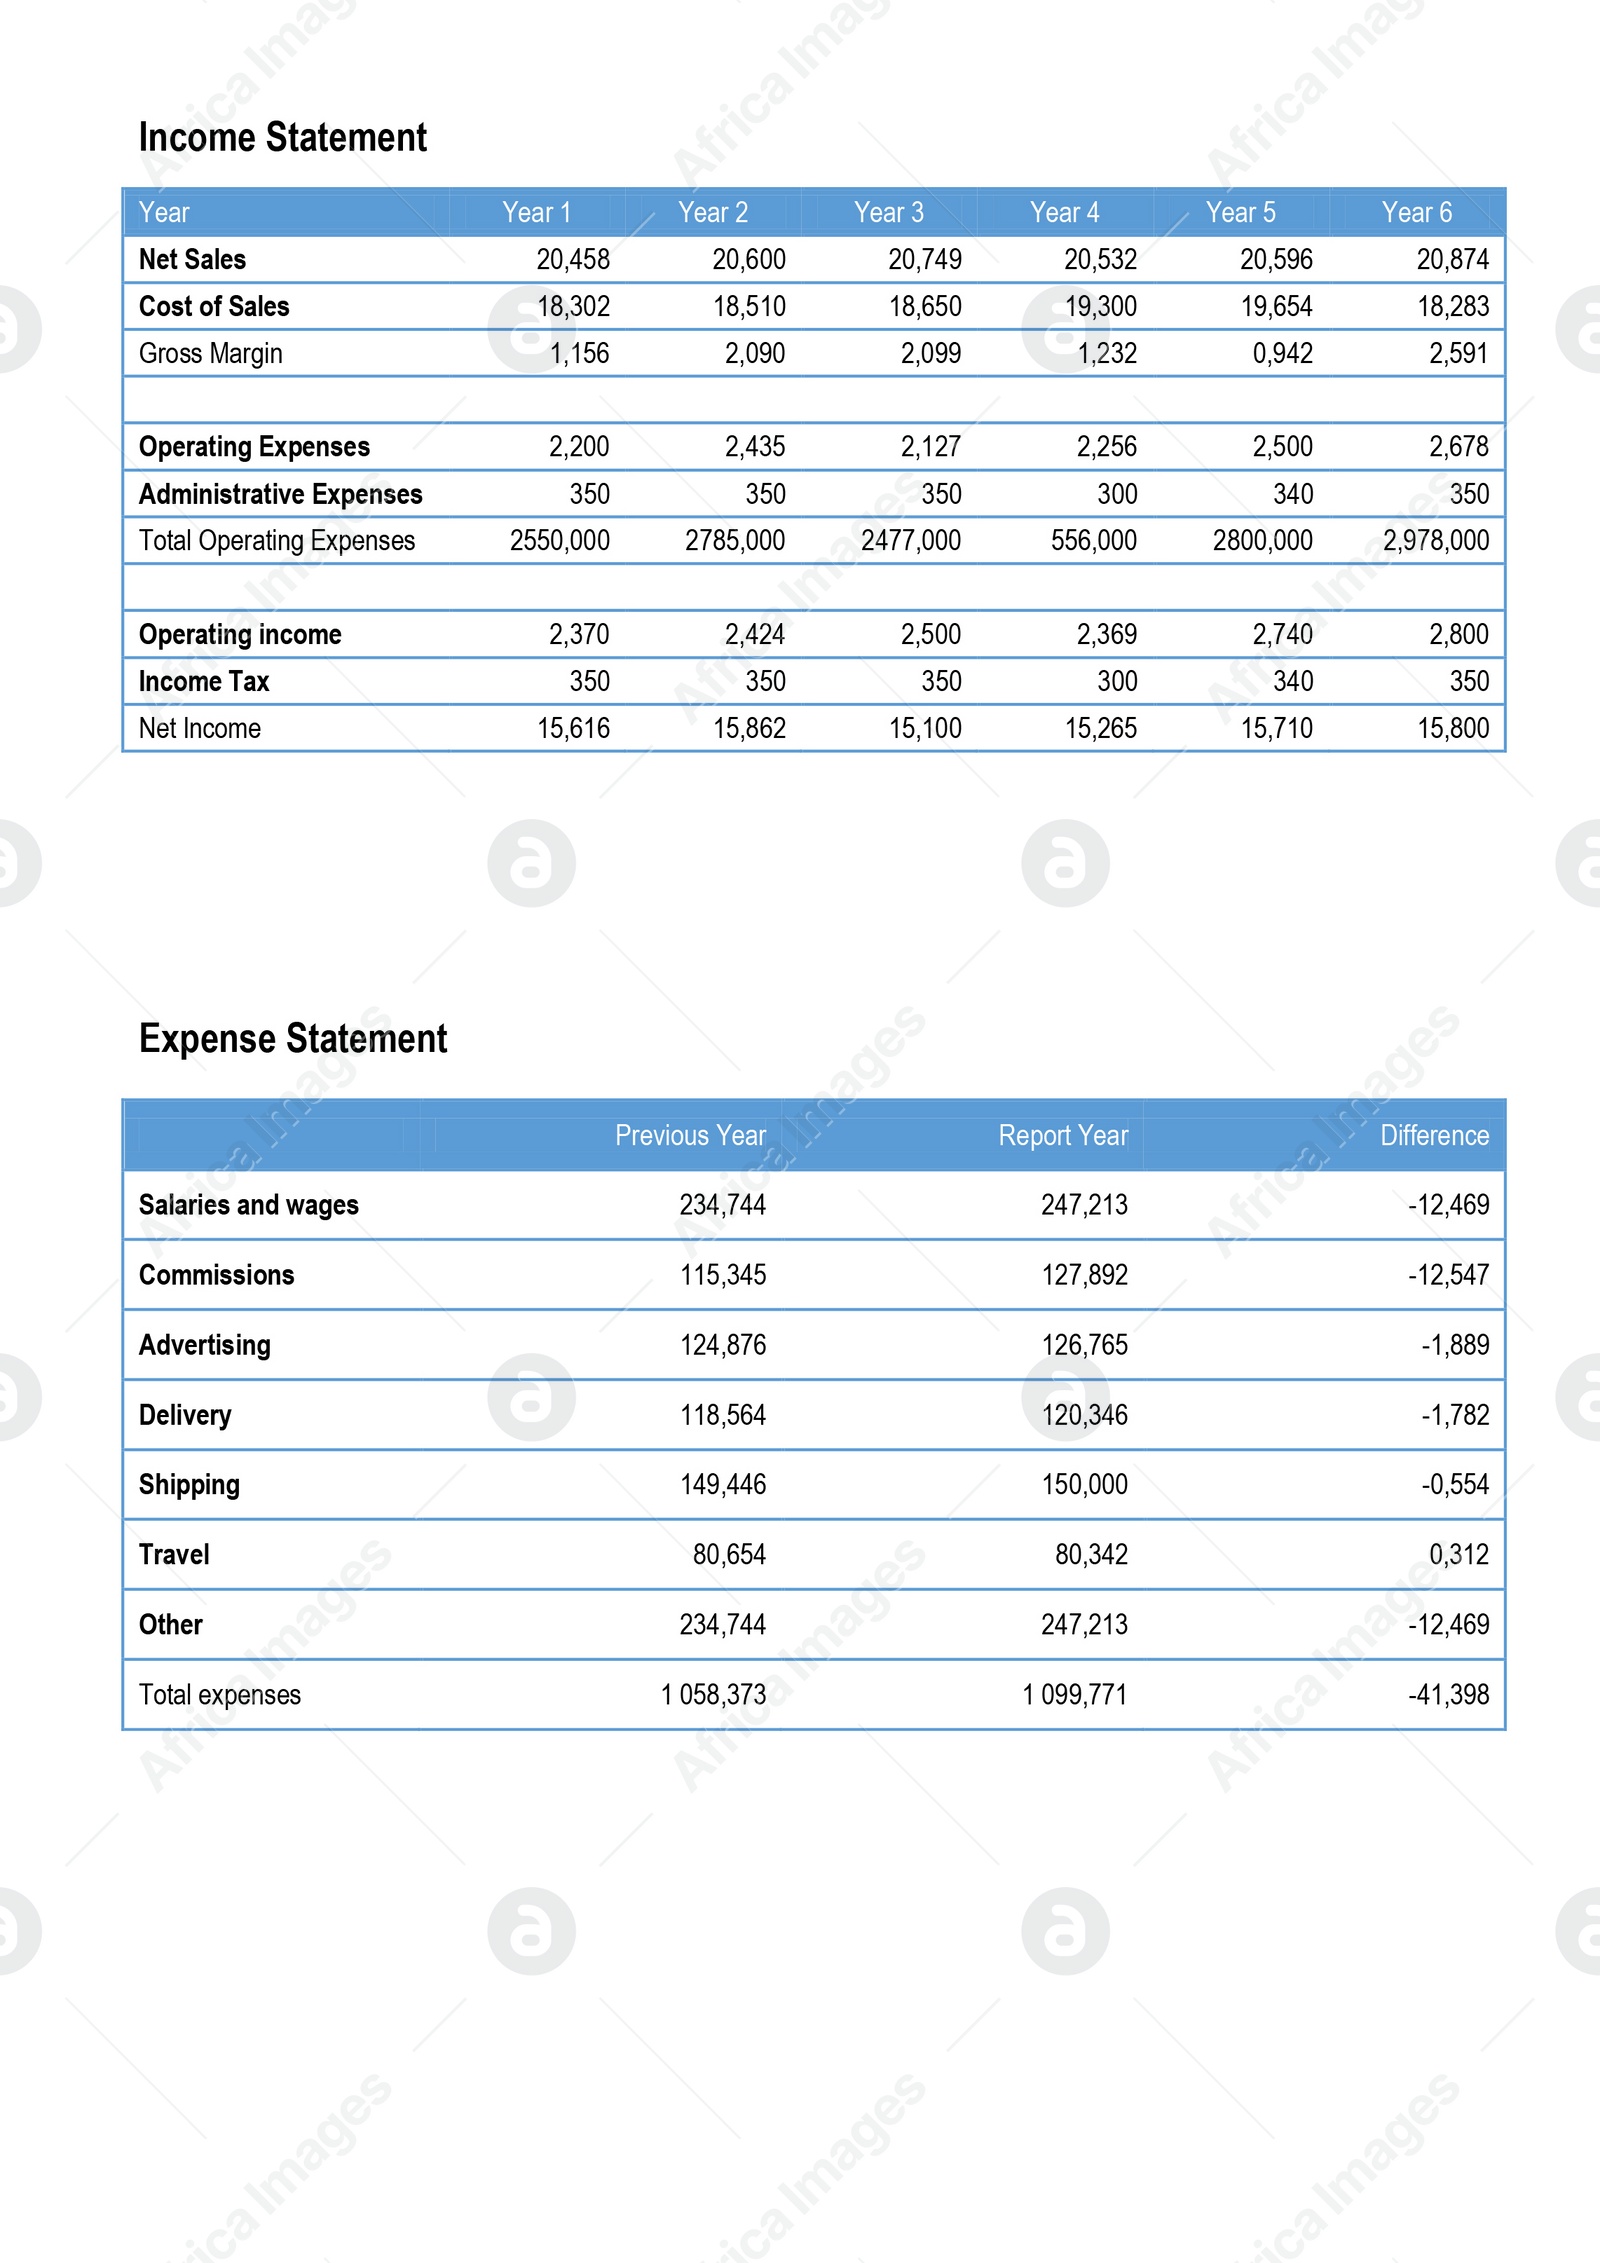 Illustration of Accounting document. Table with data on white background